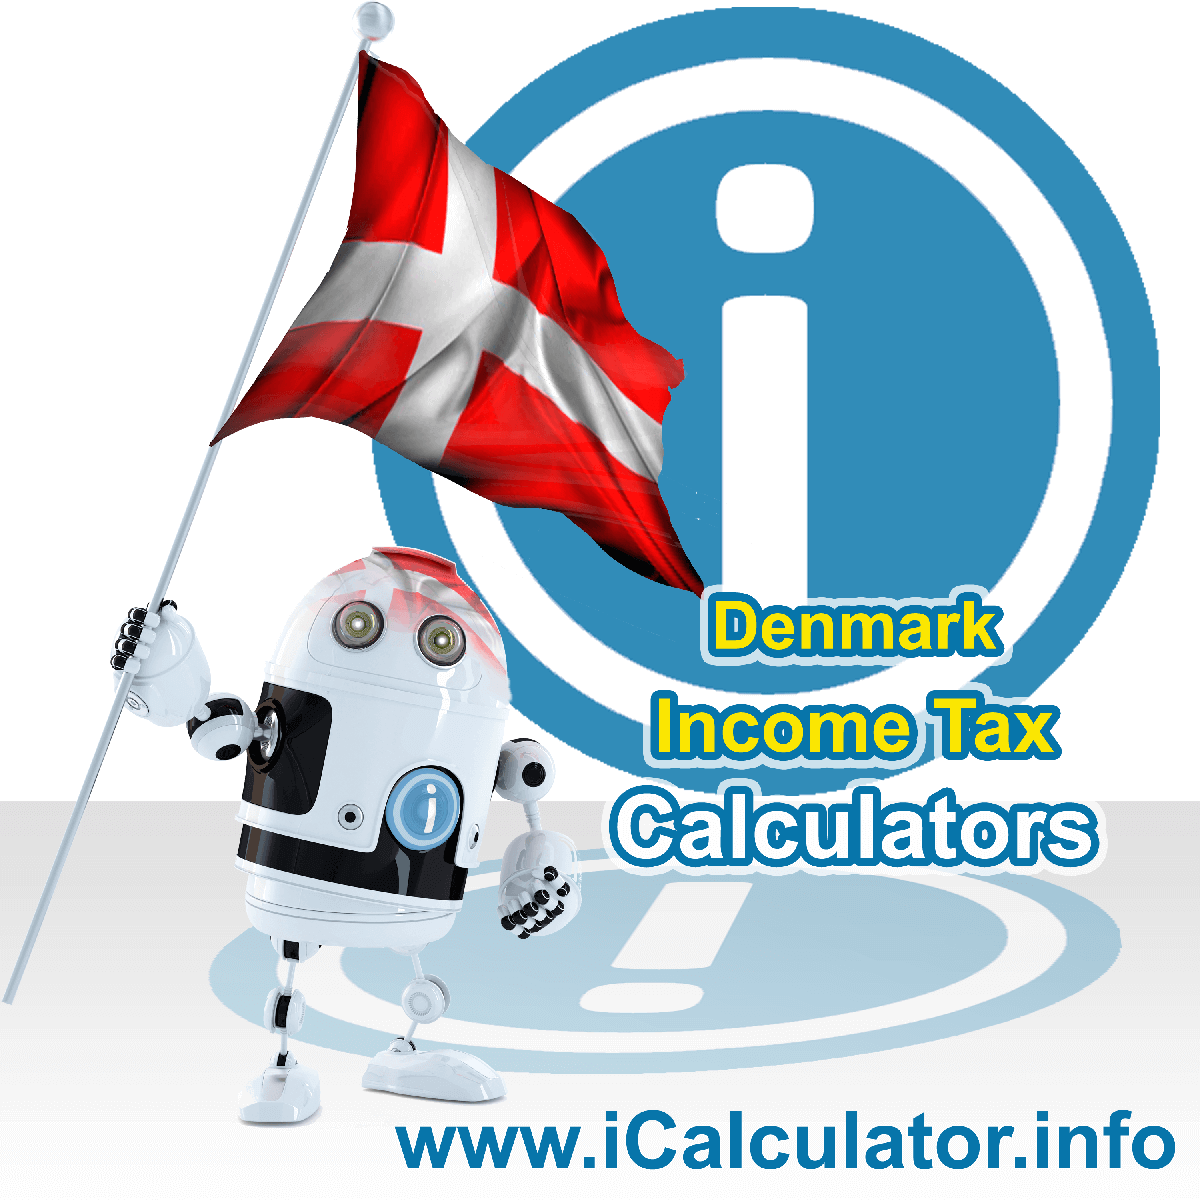 Denmark Income Tax Calculator. This image shows a new employer in Denmark calculating the annual payroll costs based on multiple payroll payments in one year in Denmark using the Denmark income tax calculator to understand their payroll costs in Denmark in 2023